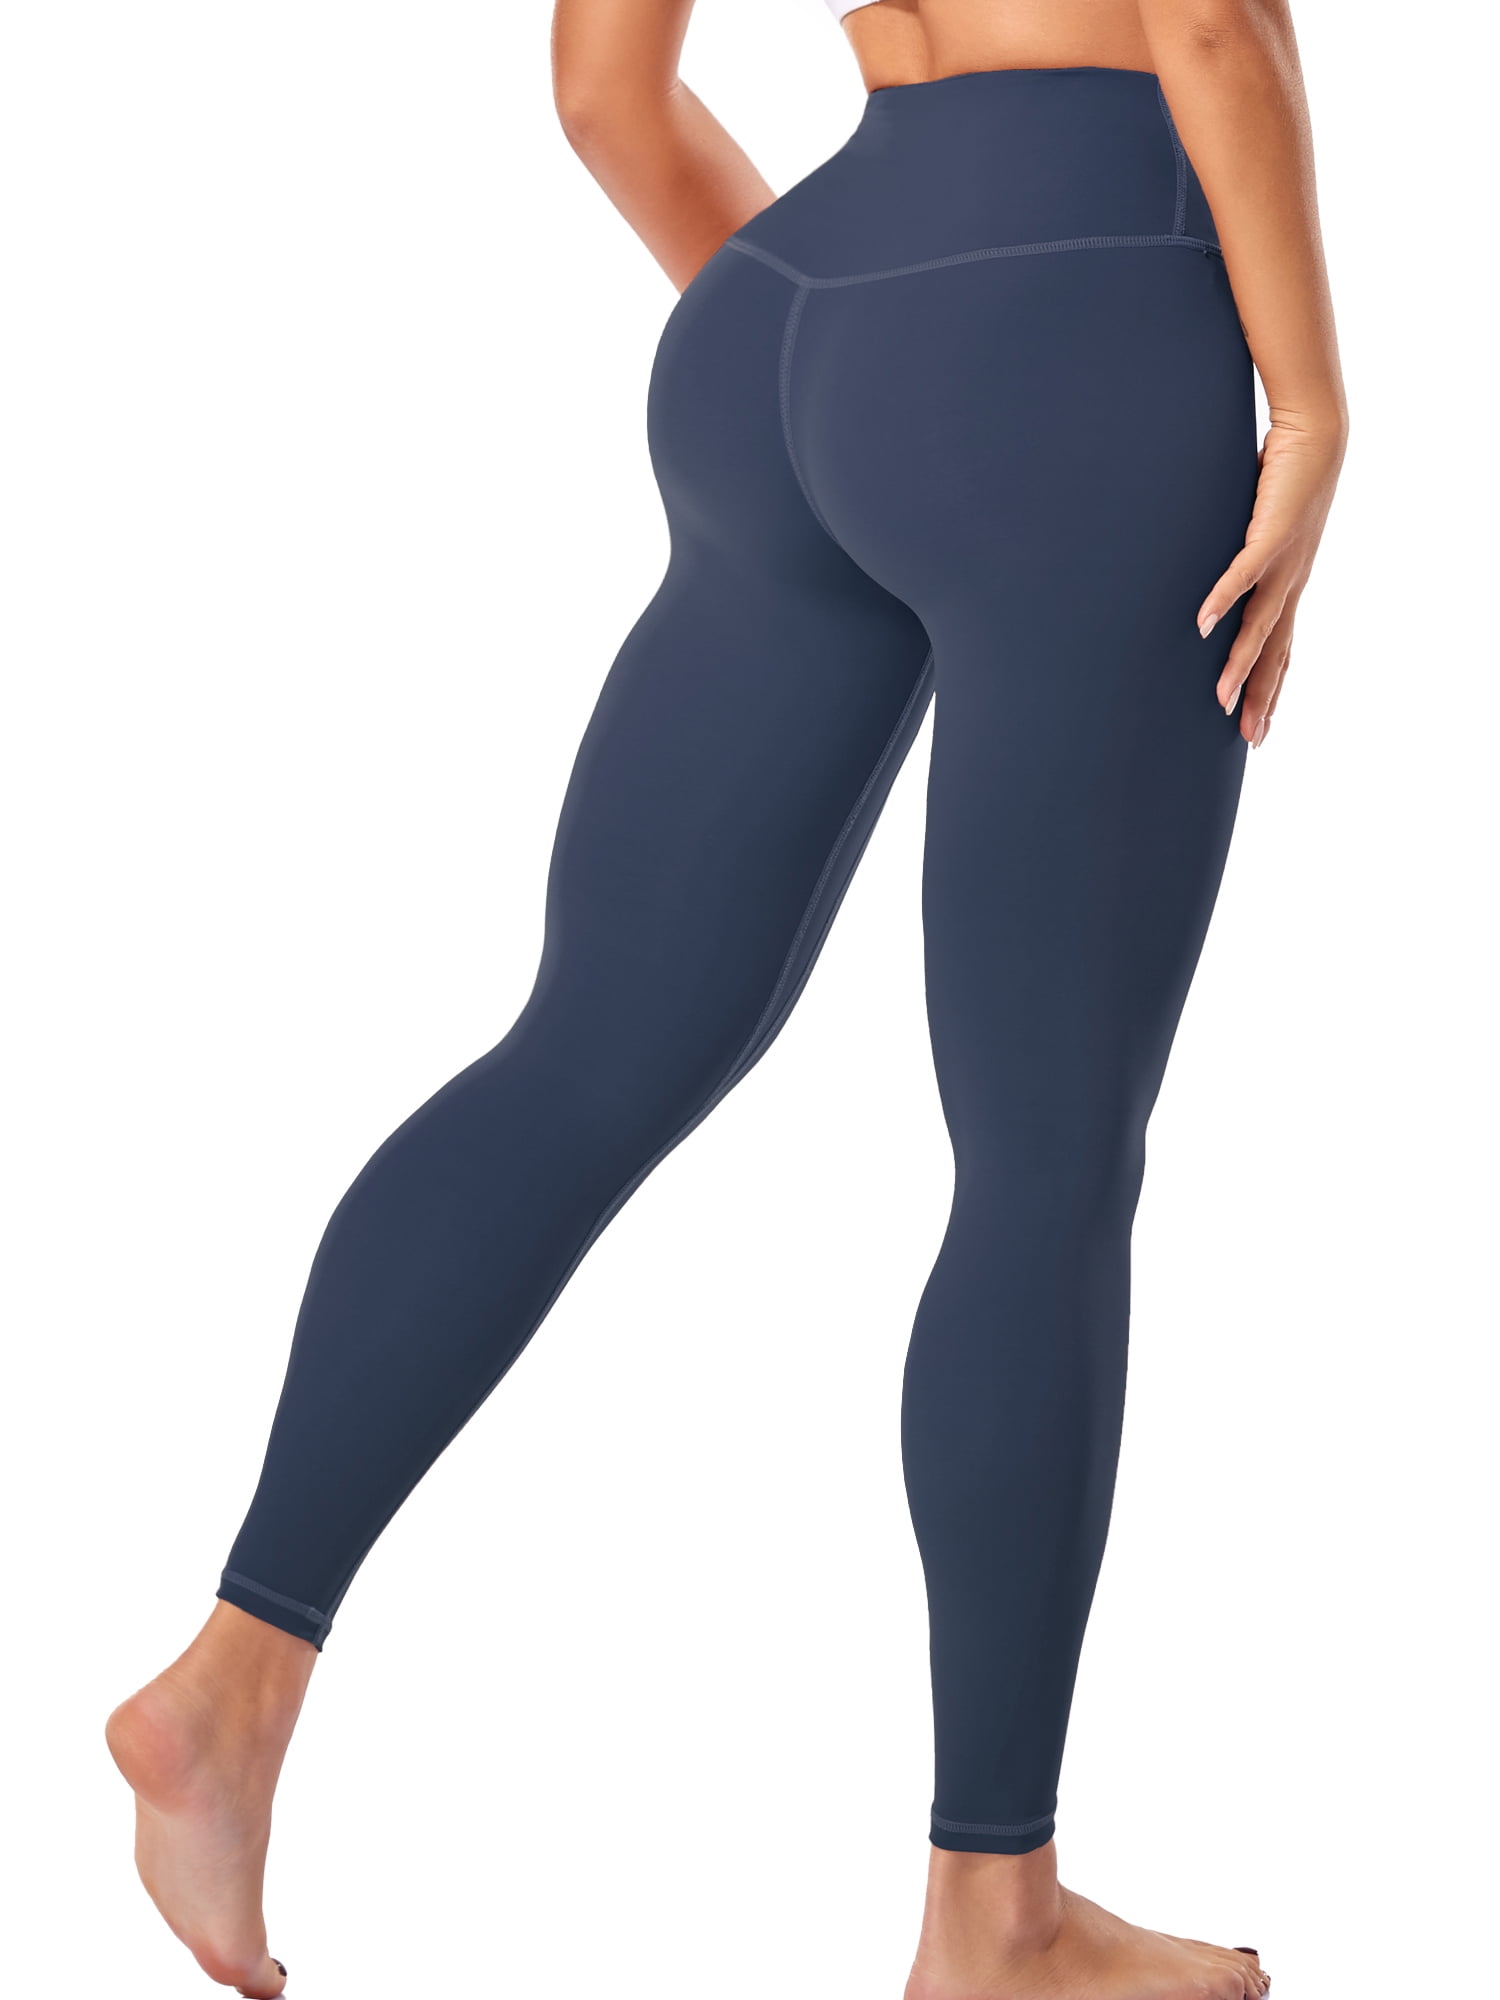 No Cameltoe Leggings with Pockets High Waisted 7/8 Length Seamless Yoga Pants for Women Tummy Control Butt Lifting